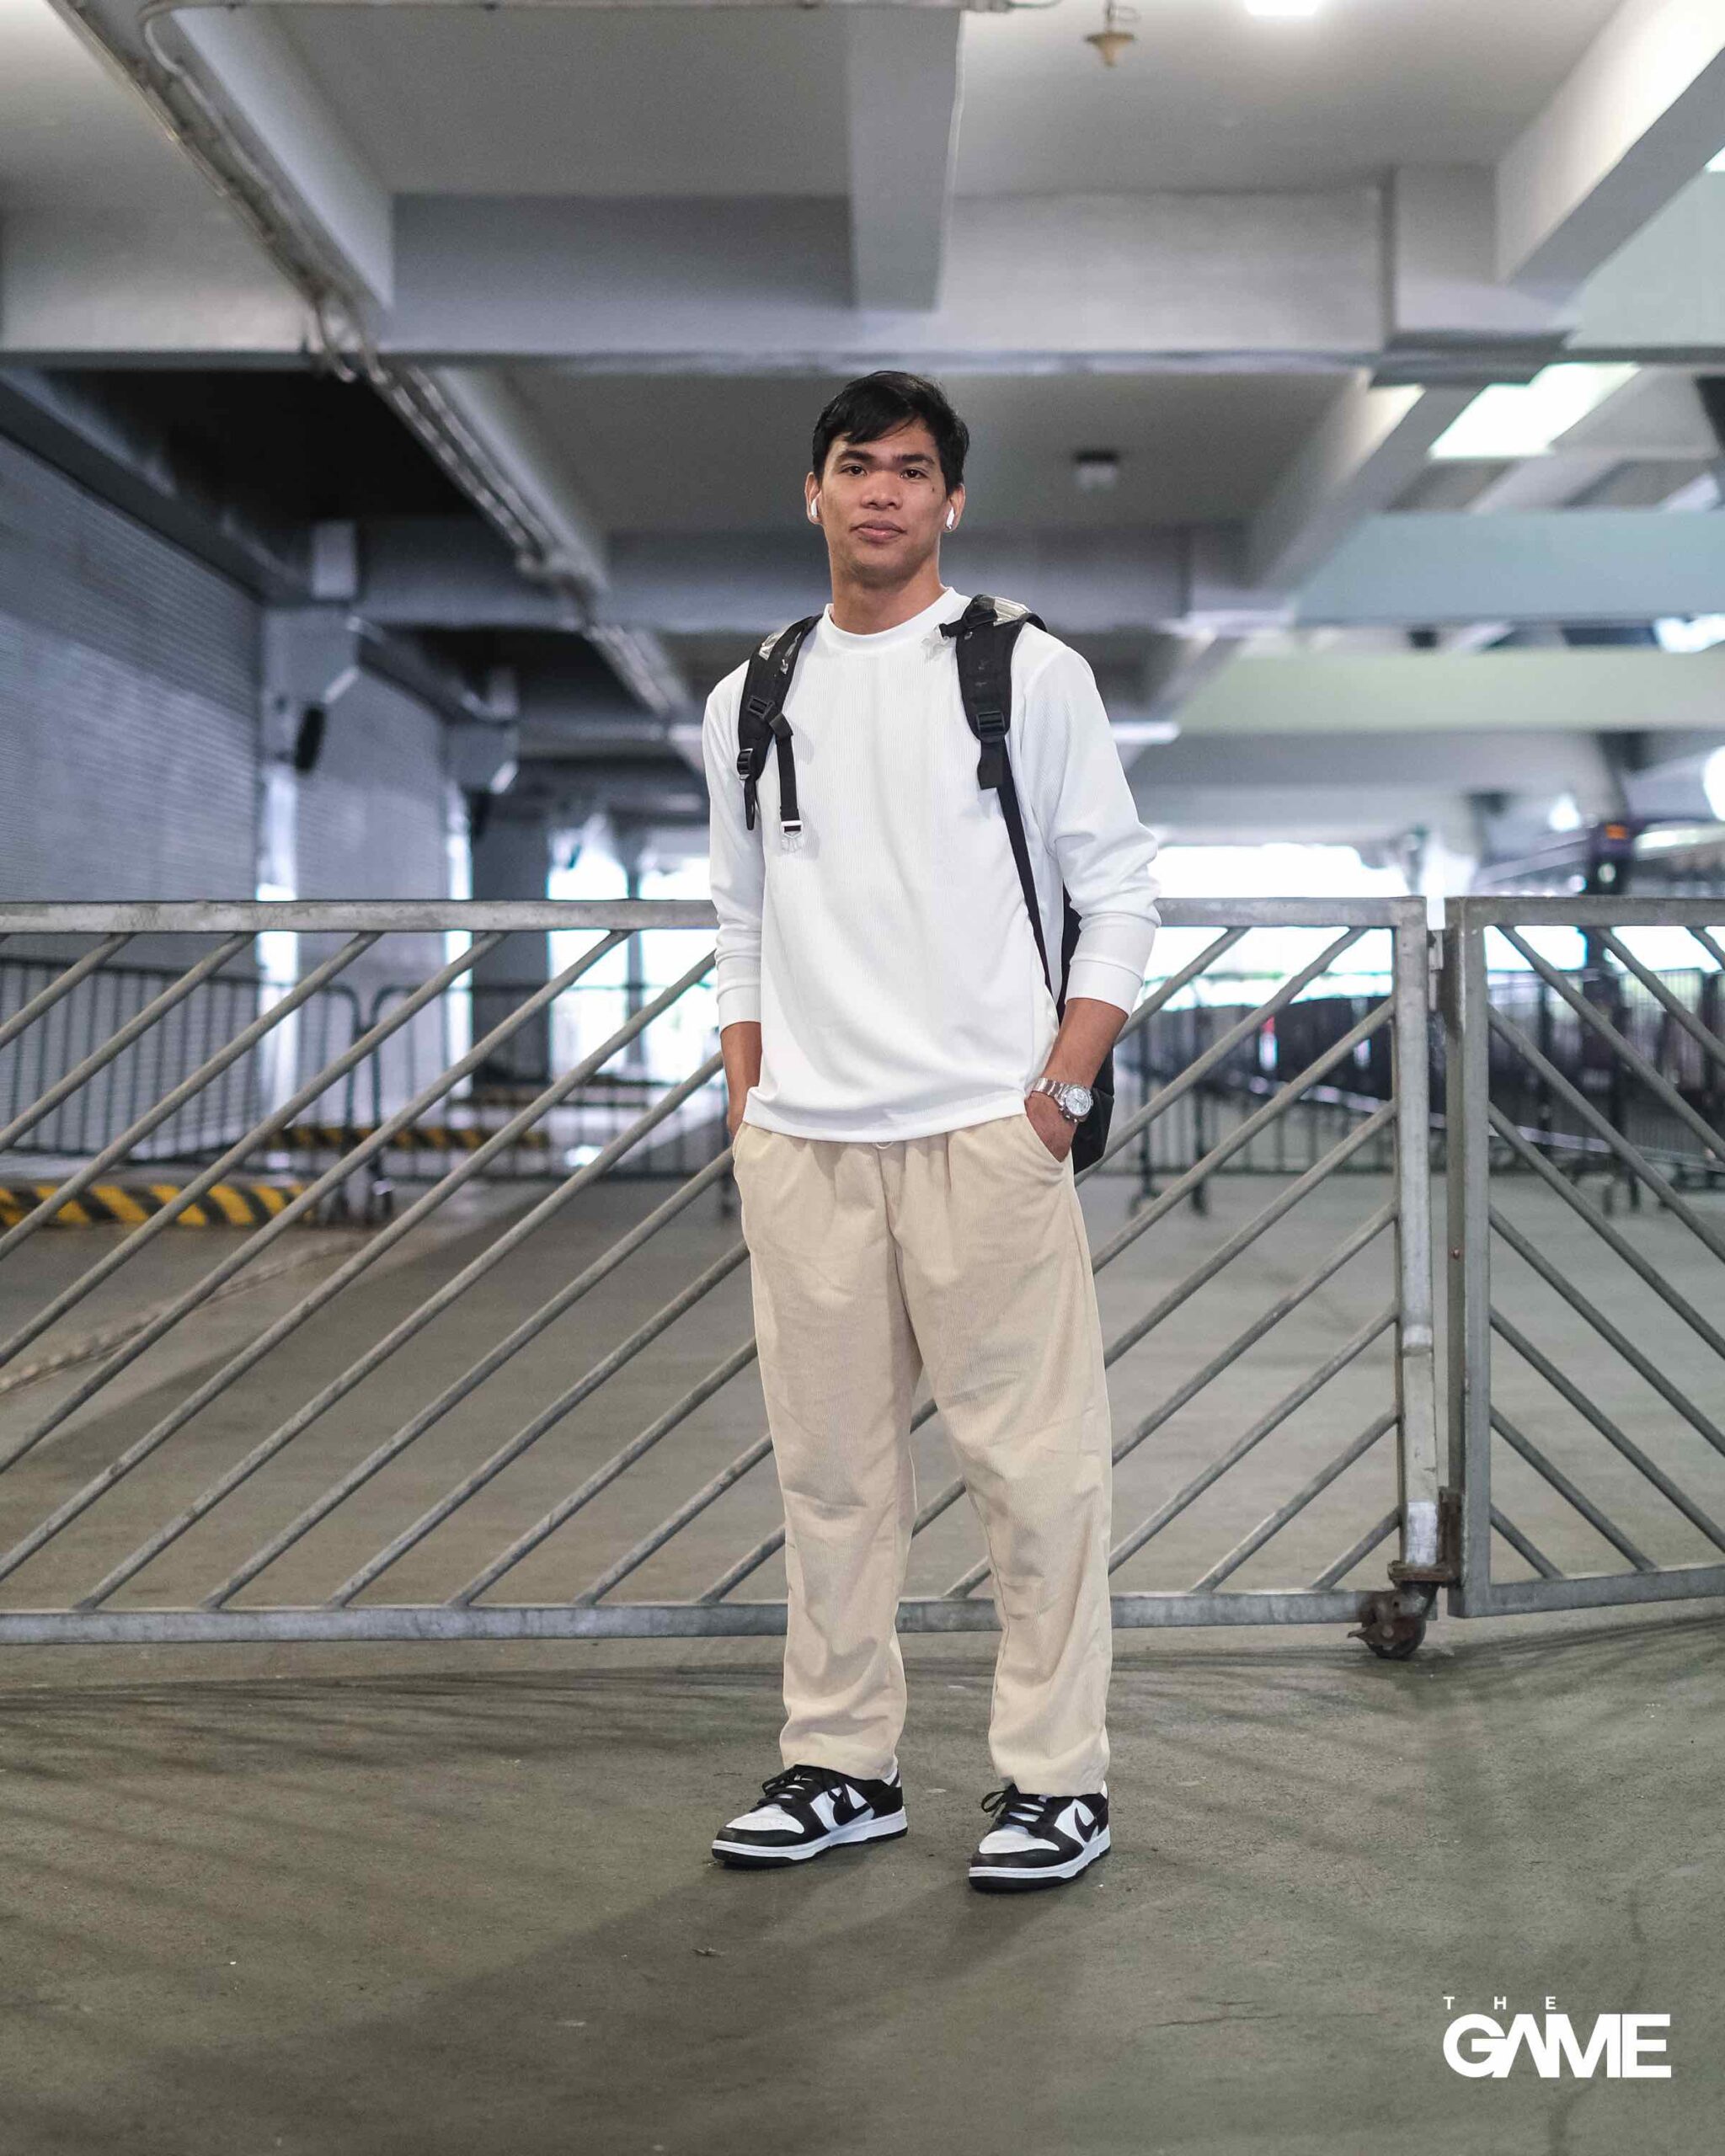 DLSU vs UP (UAAP Round 2 Outfits): Mark Nonoy